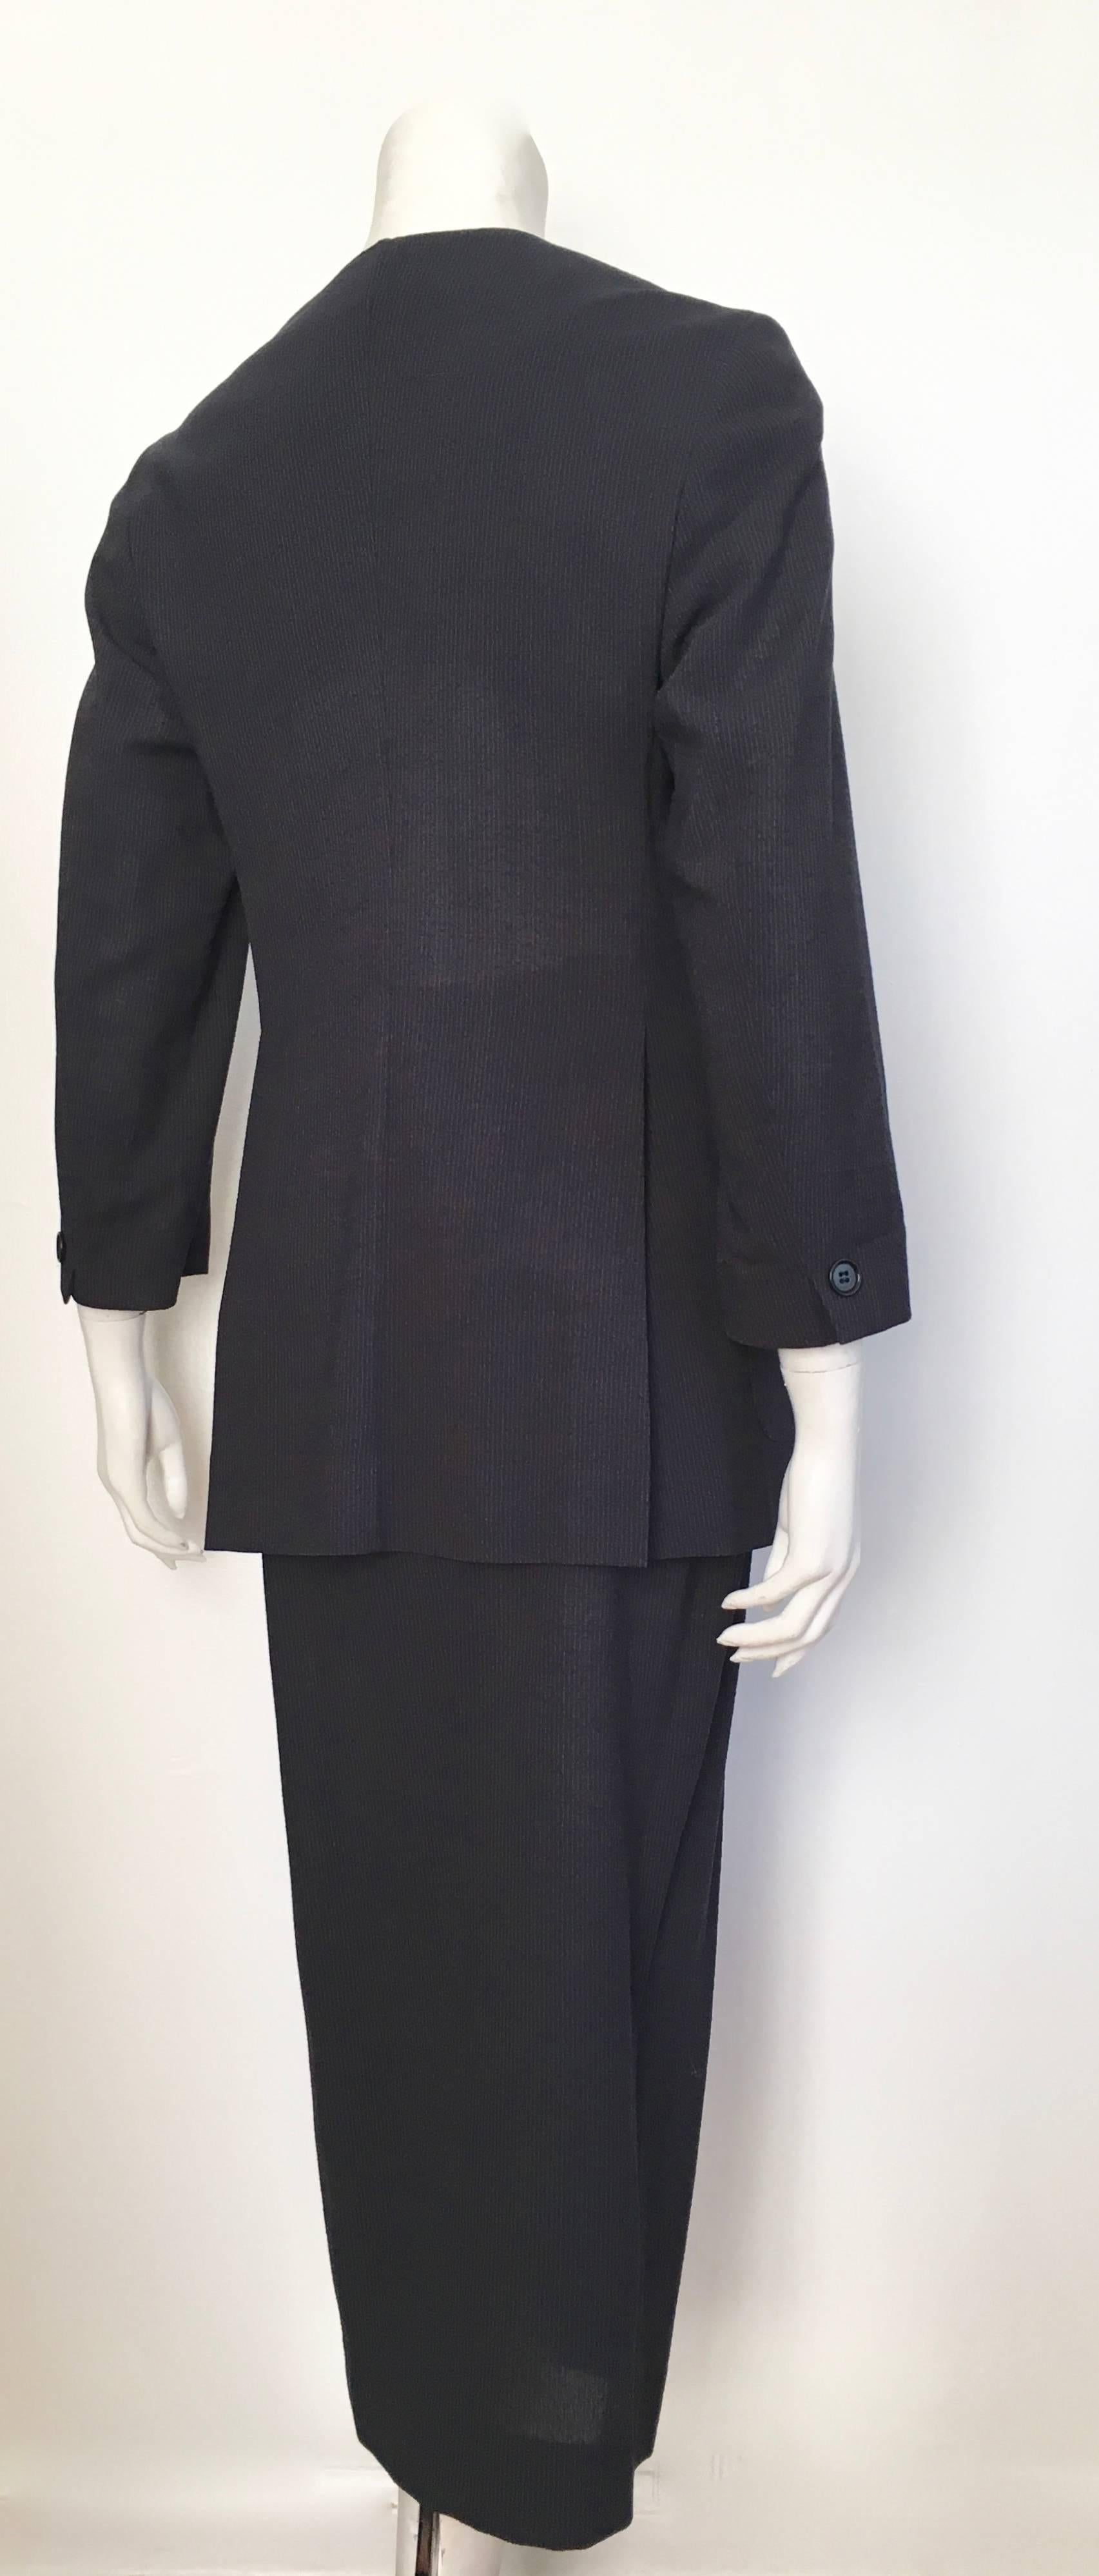 Romeo Gigli 1980s Wool Navy Jacket & Wrap Skirt Suit Size 6. In Excellent Condition For Sale In Atlanta, GA